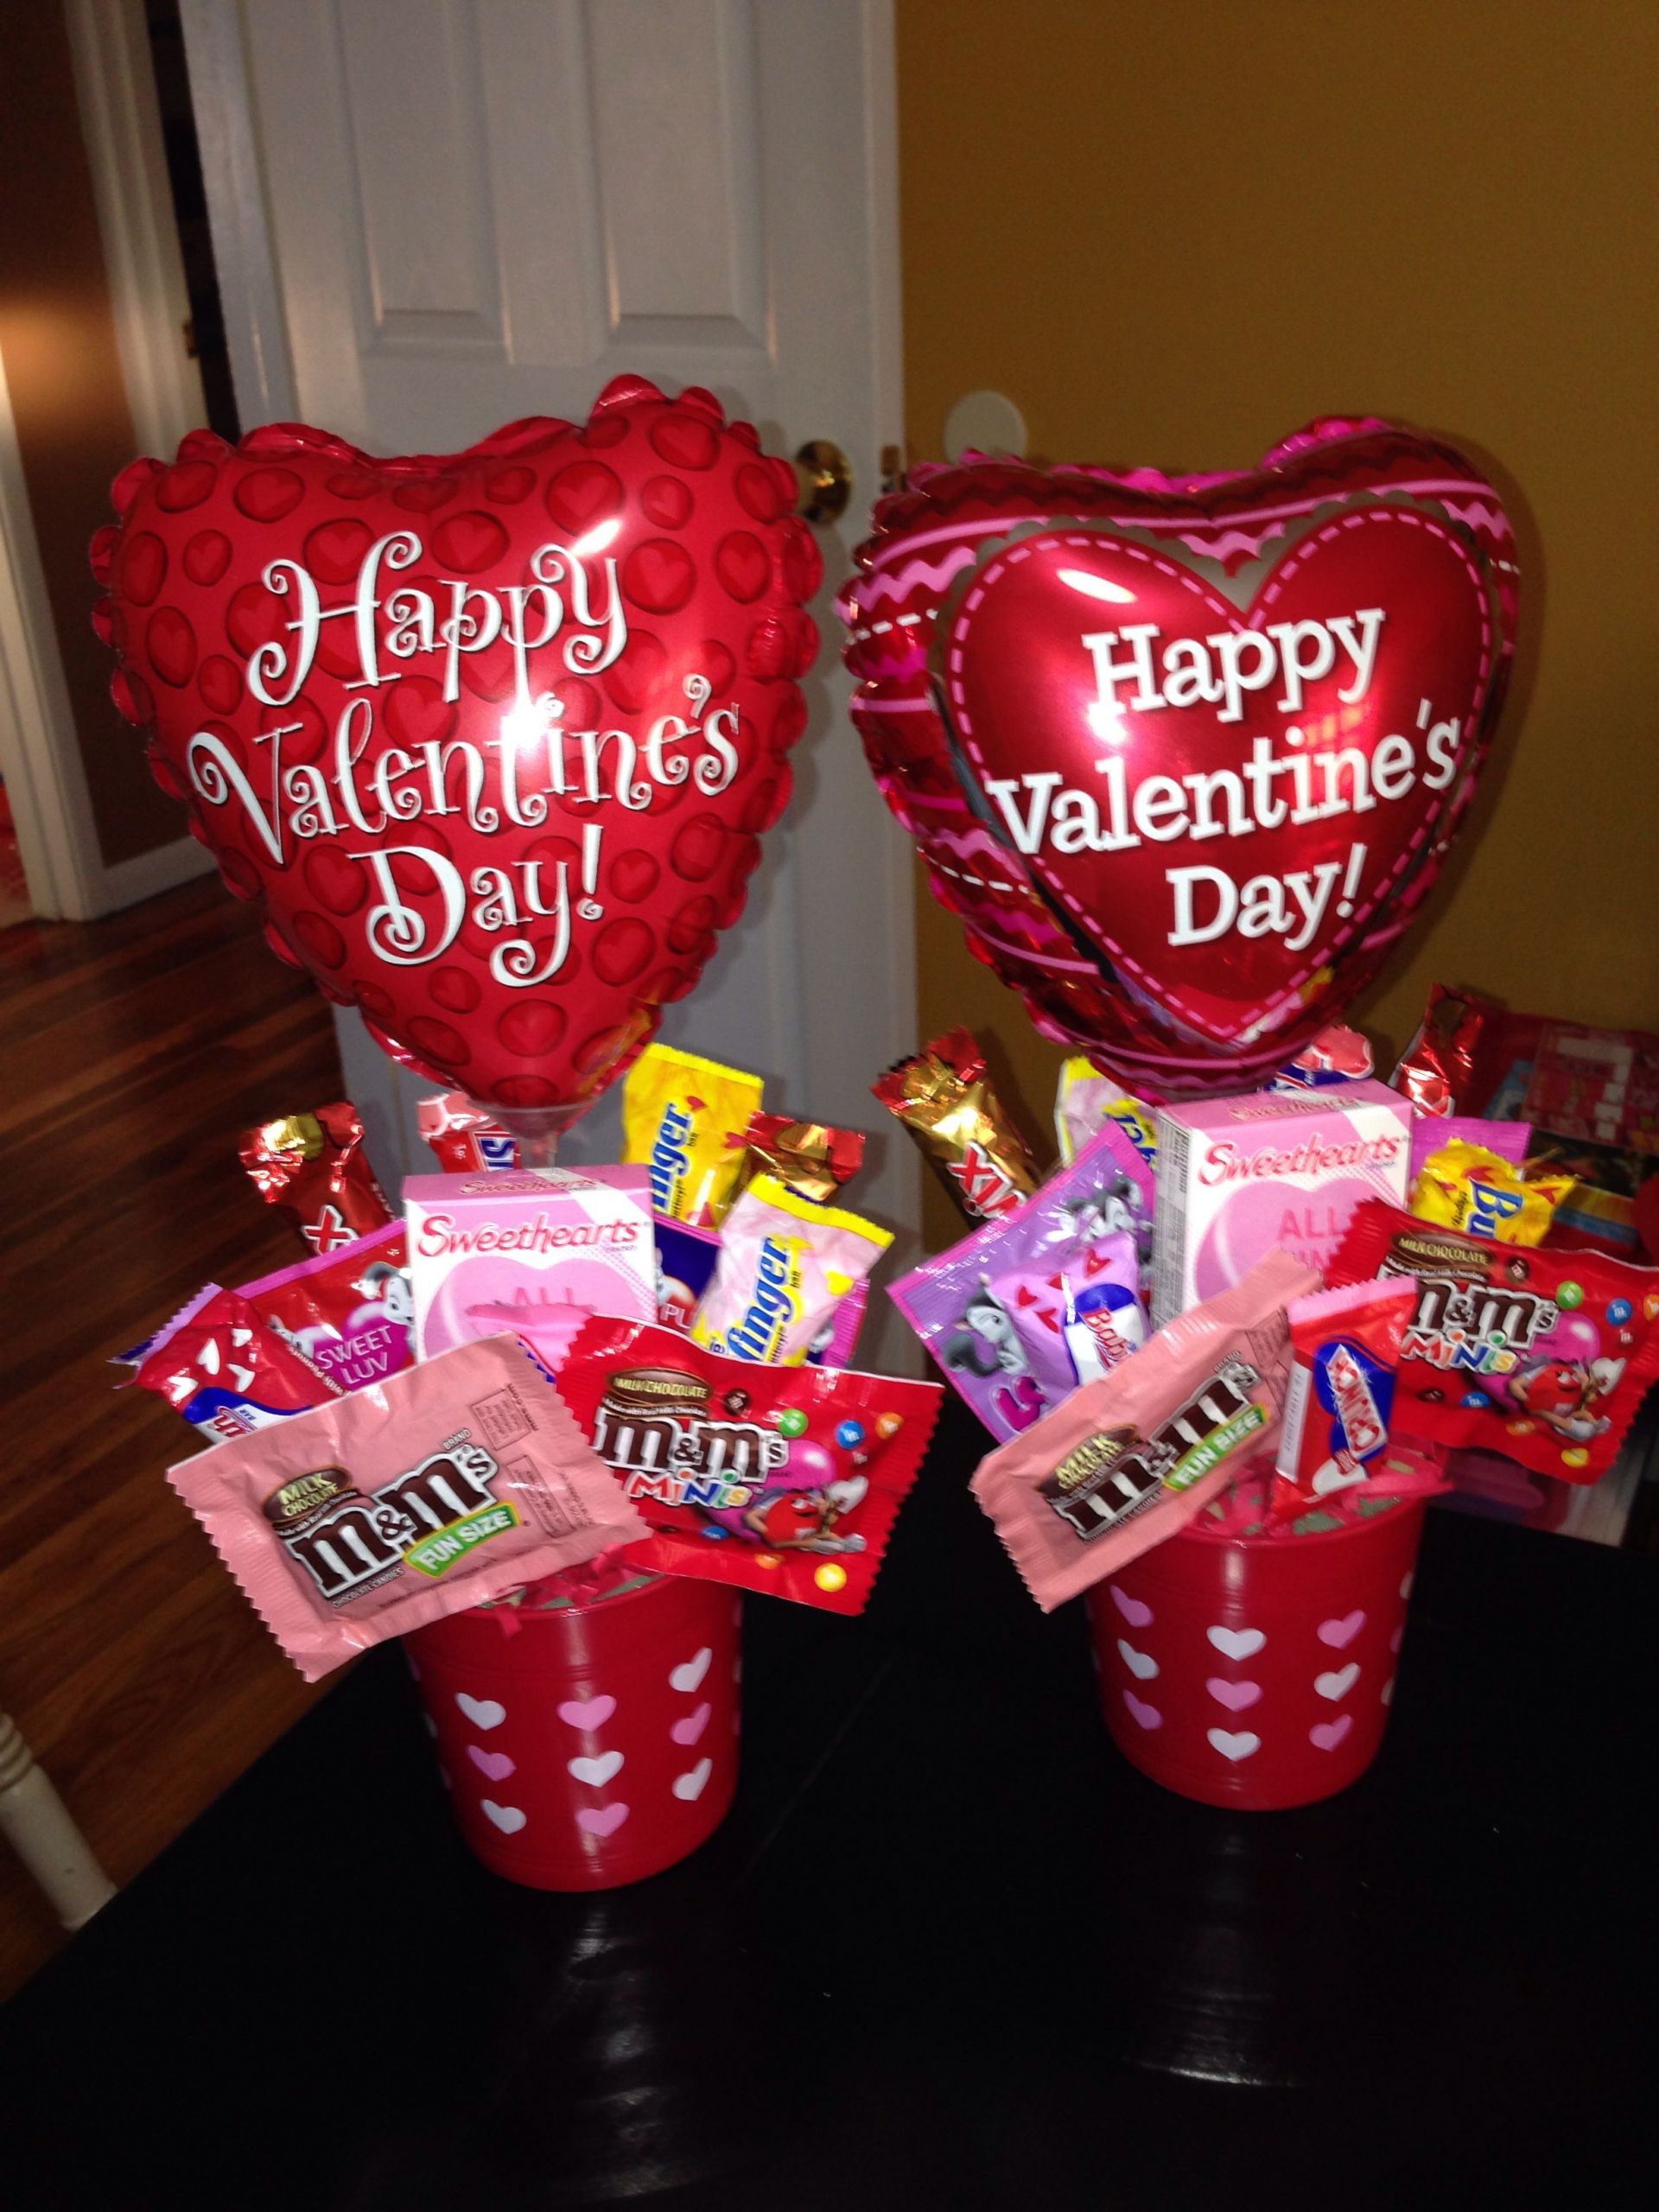 Valentines Cheap Gift Ideas
 Small valentines bouquets